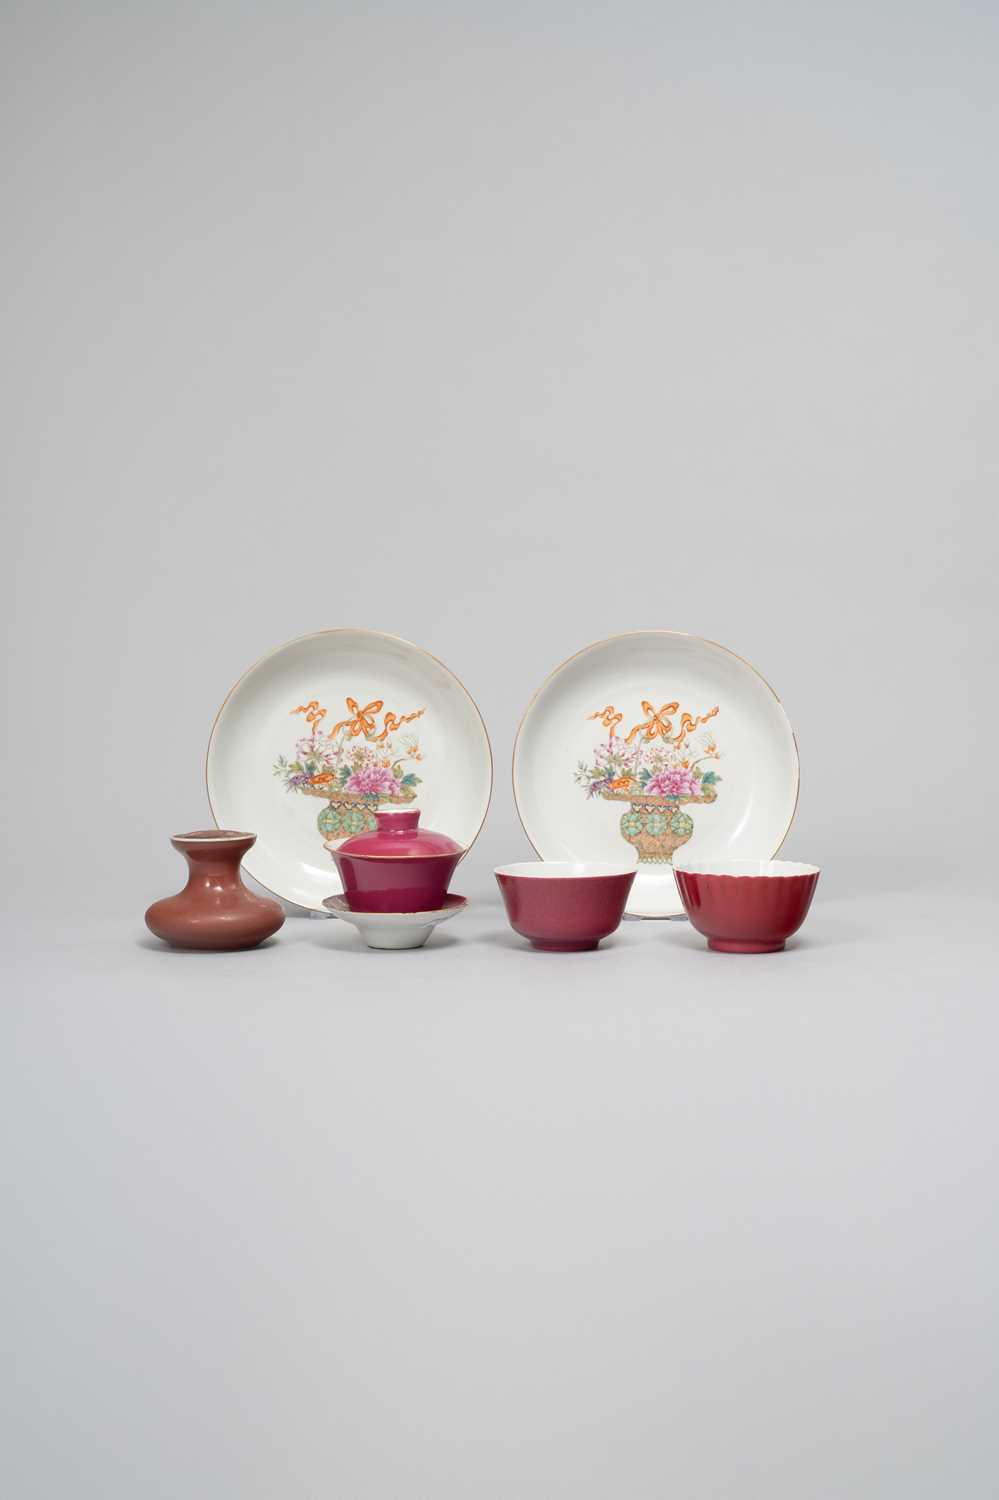 NO RESERVE FIVE CHINESE FAMILLE ROSE RUBY-GROUND ITEMS 20TH CENTURY Comprising: two dishes, the base